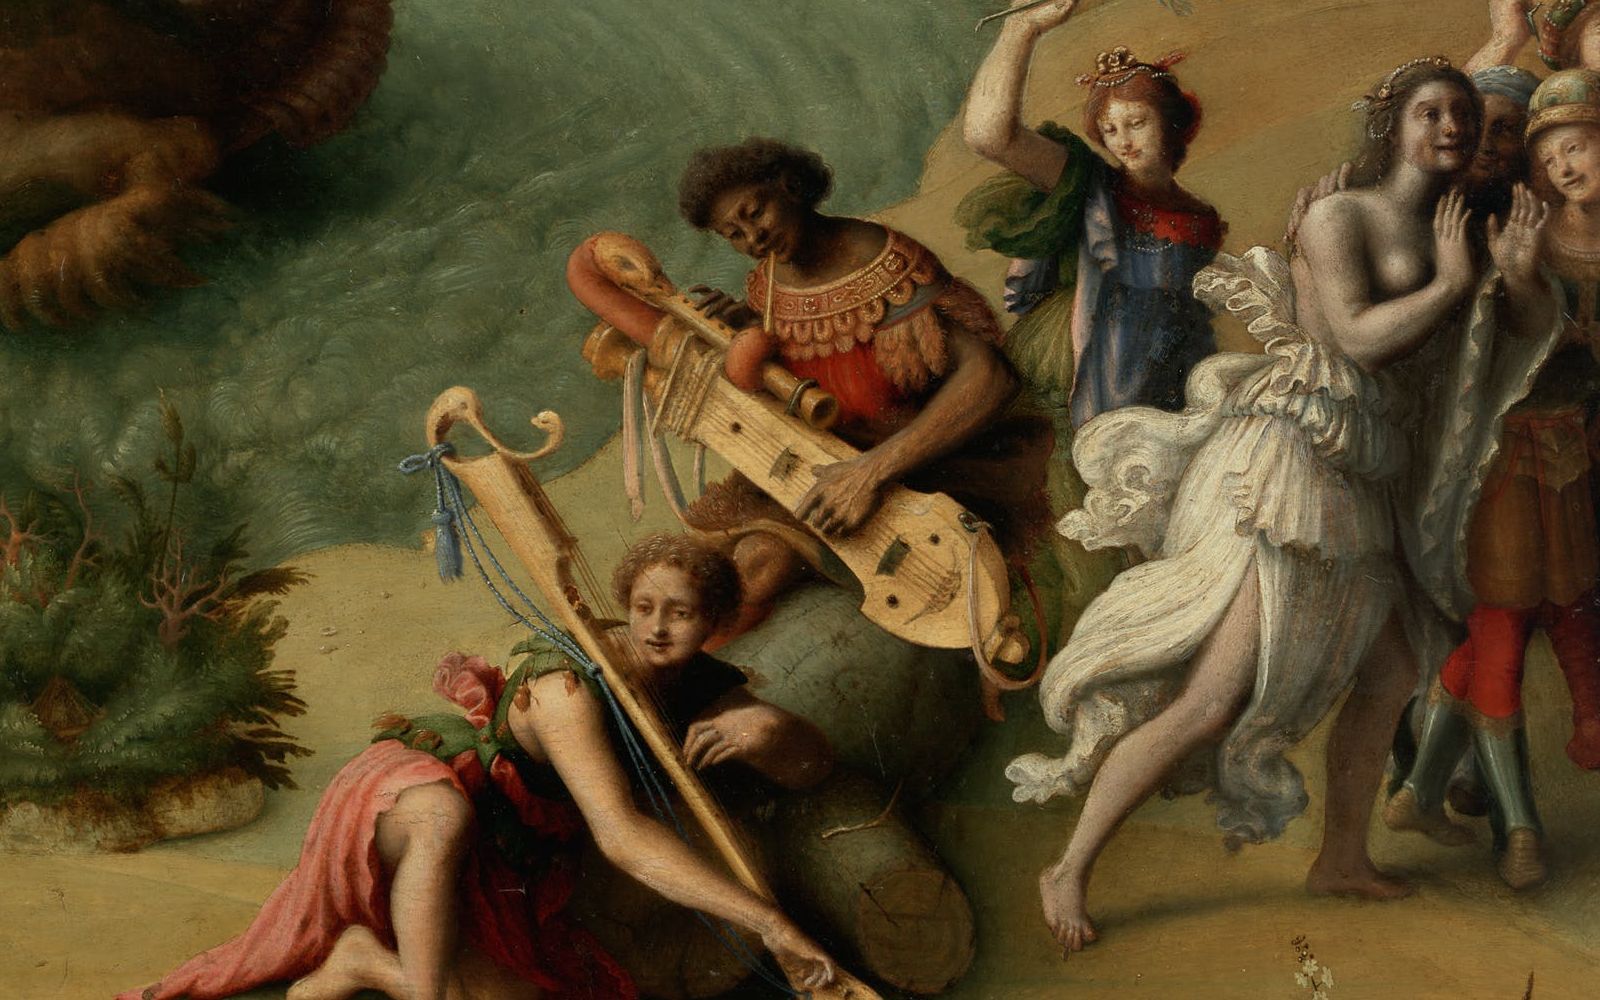 The Uffizi tells the story of black presence in the Renaissance A social media project on Facebook and TikTok that will explore the role of diversity in art history